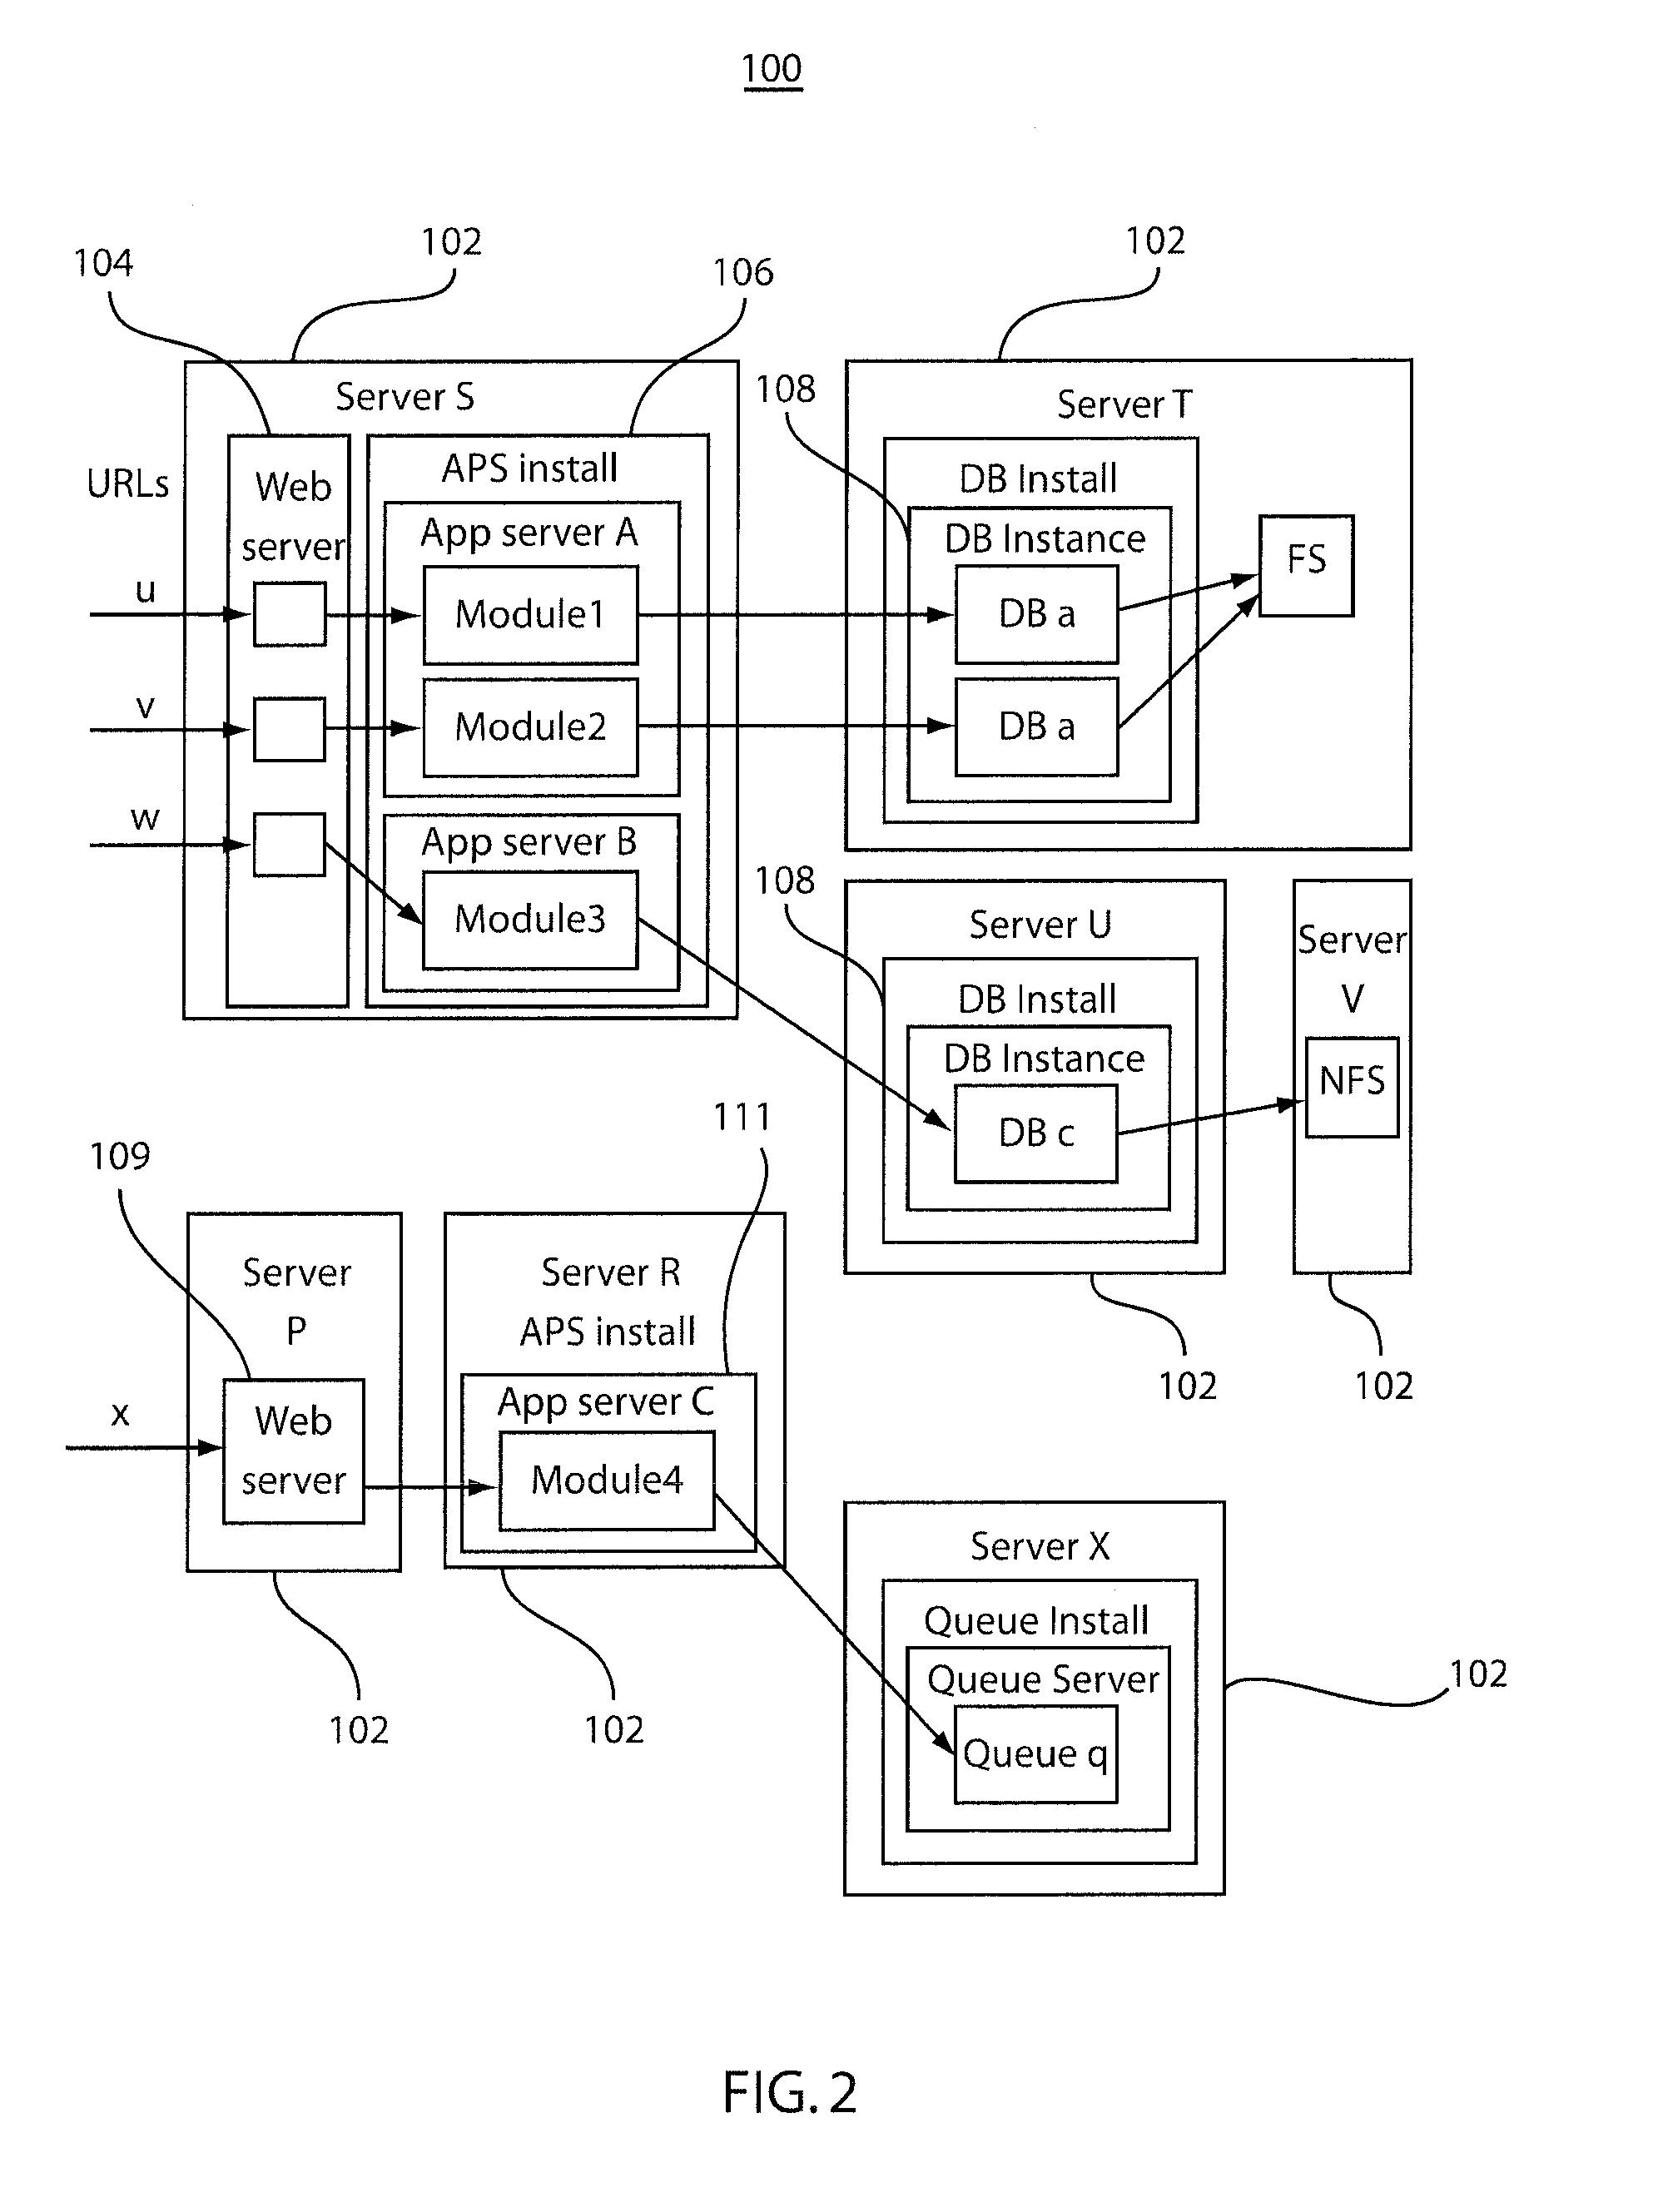 Multi-image migration system and method